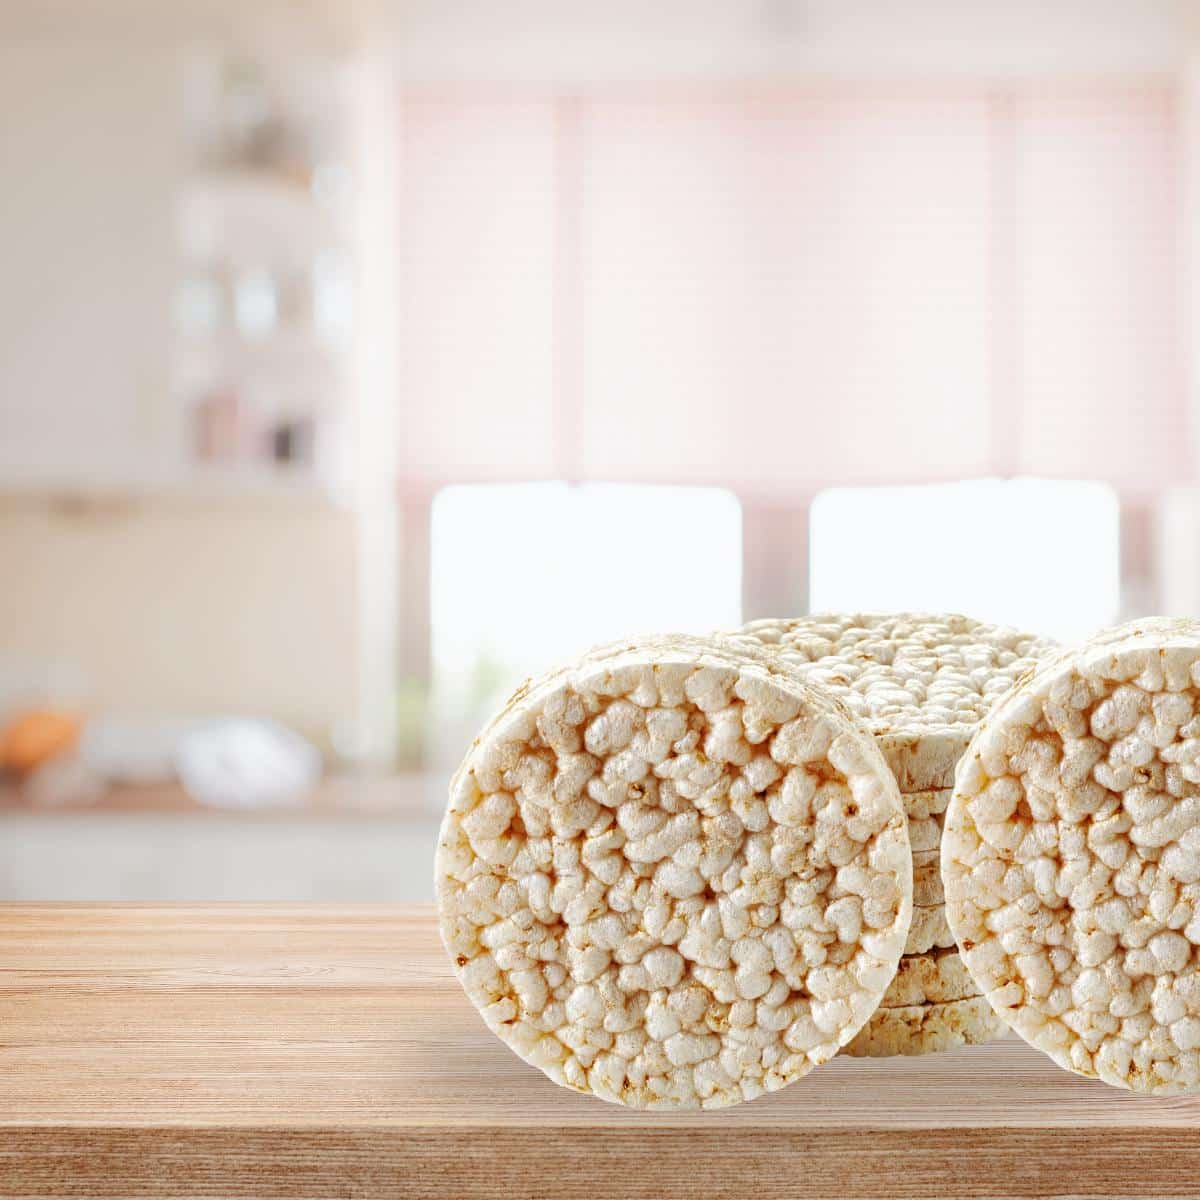 Puffed rice cake crackers sitting on the kitchen counter.